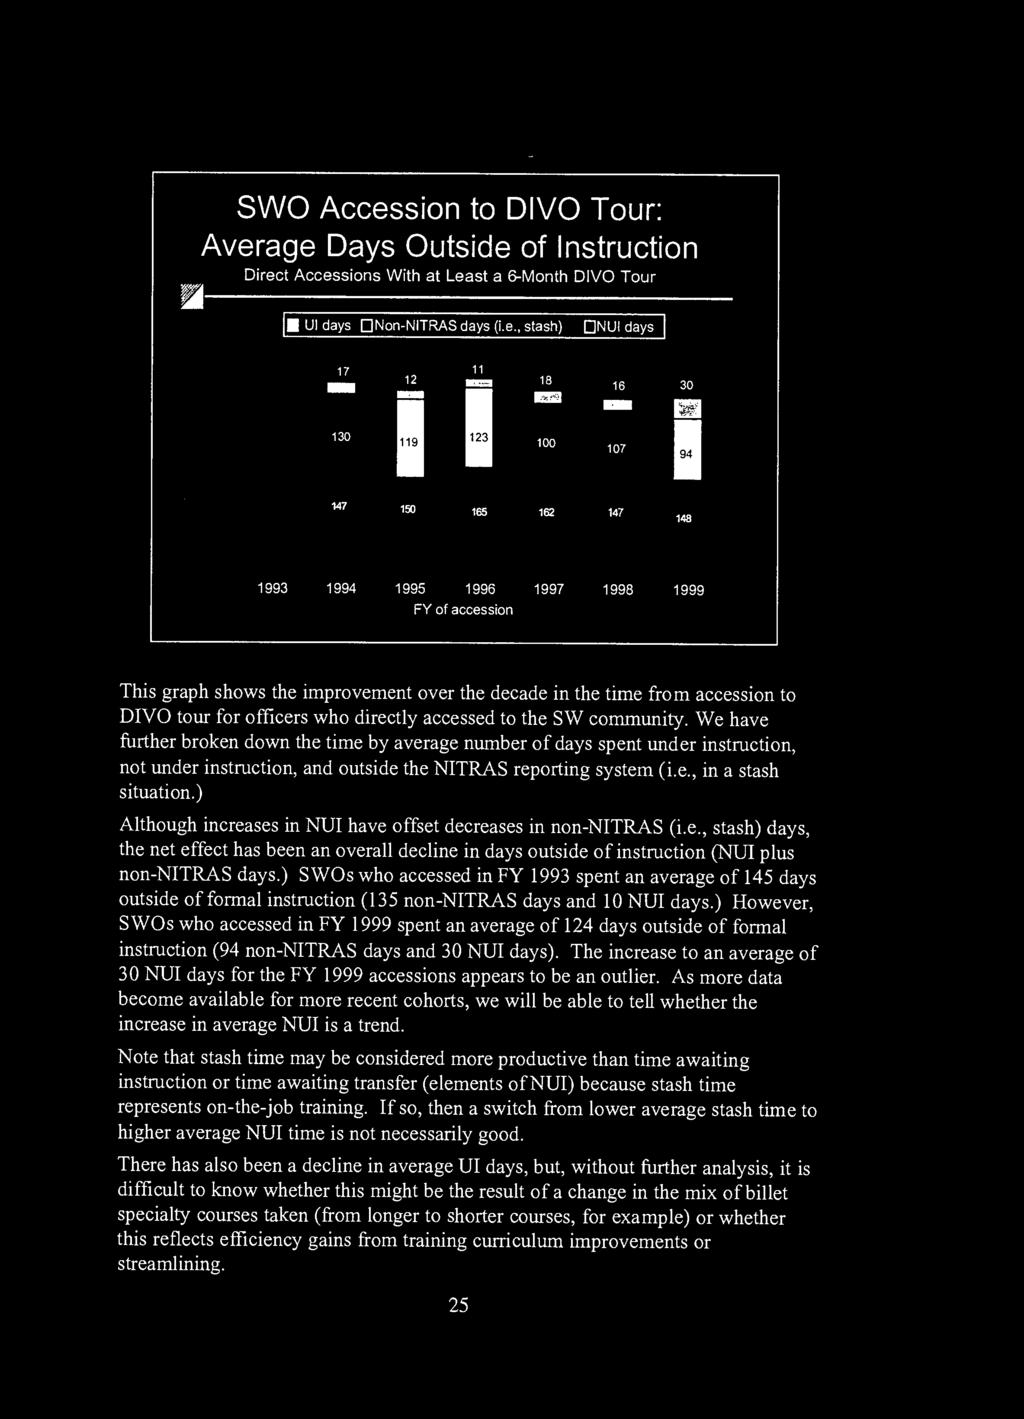 age Days Outside of Instruction Direct Accessions With at Least a 6-Month DIVO Tour Uldays DNon-NITRAS days (i.e., stash) QNUI days 12 la 16 30 130 119 123 100 107 94 6 3 B S B 5 1993 1994 1995 1996